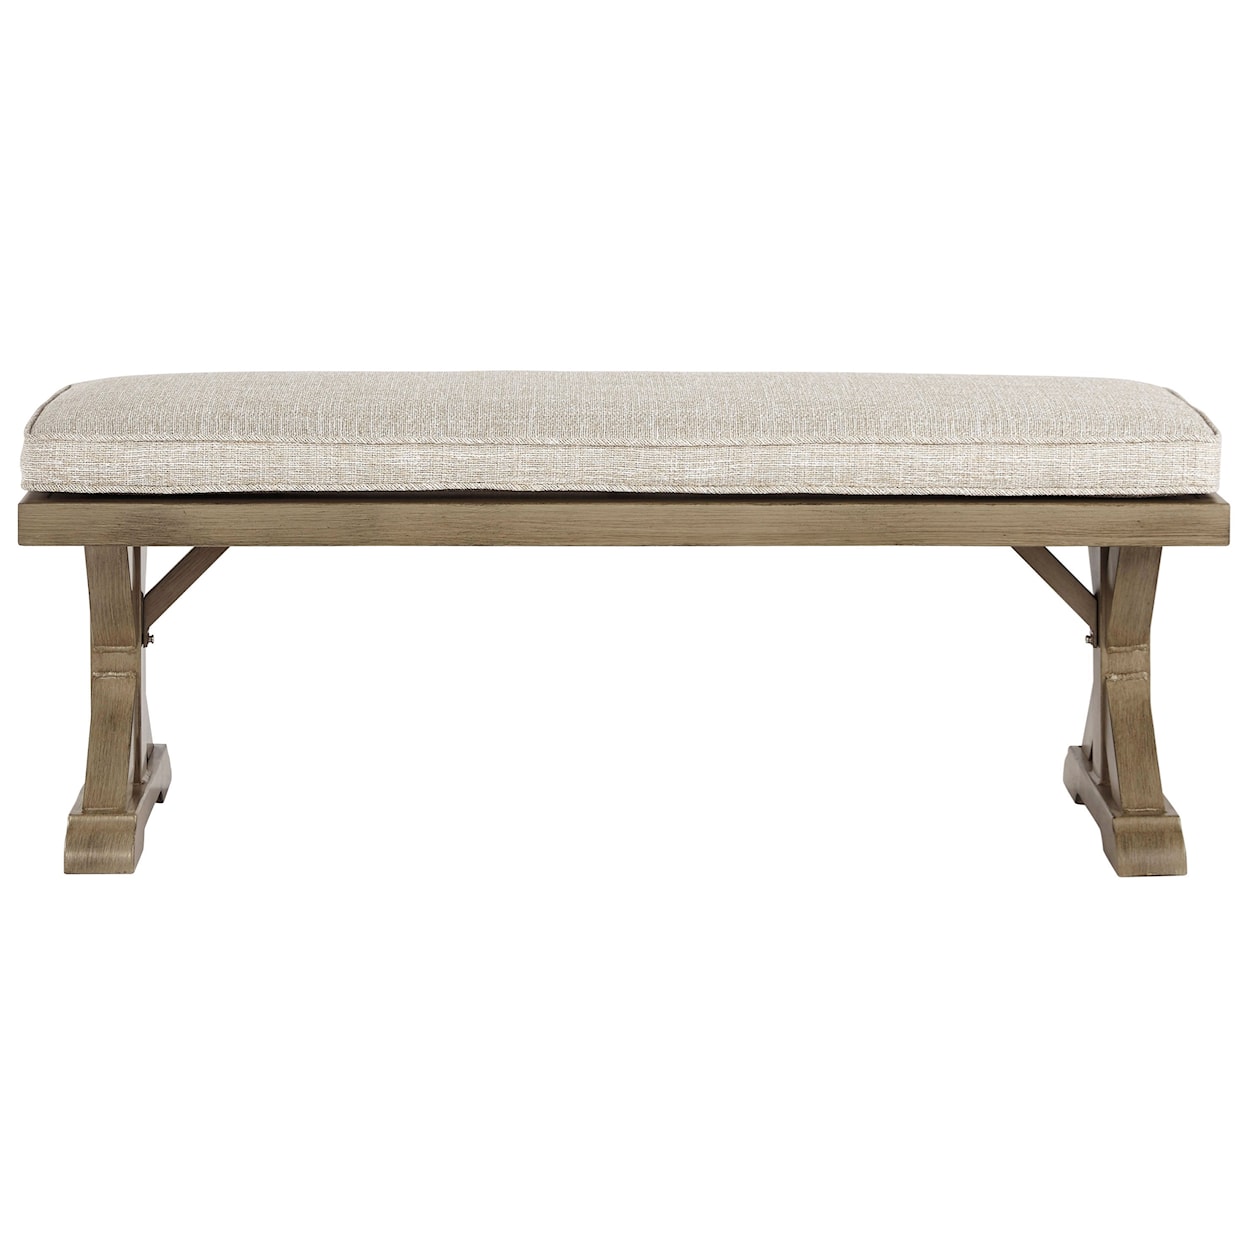 Signature Design by Ashley Beachcroft Bench with Cushion